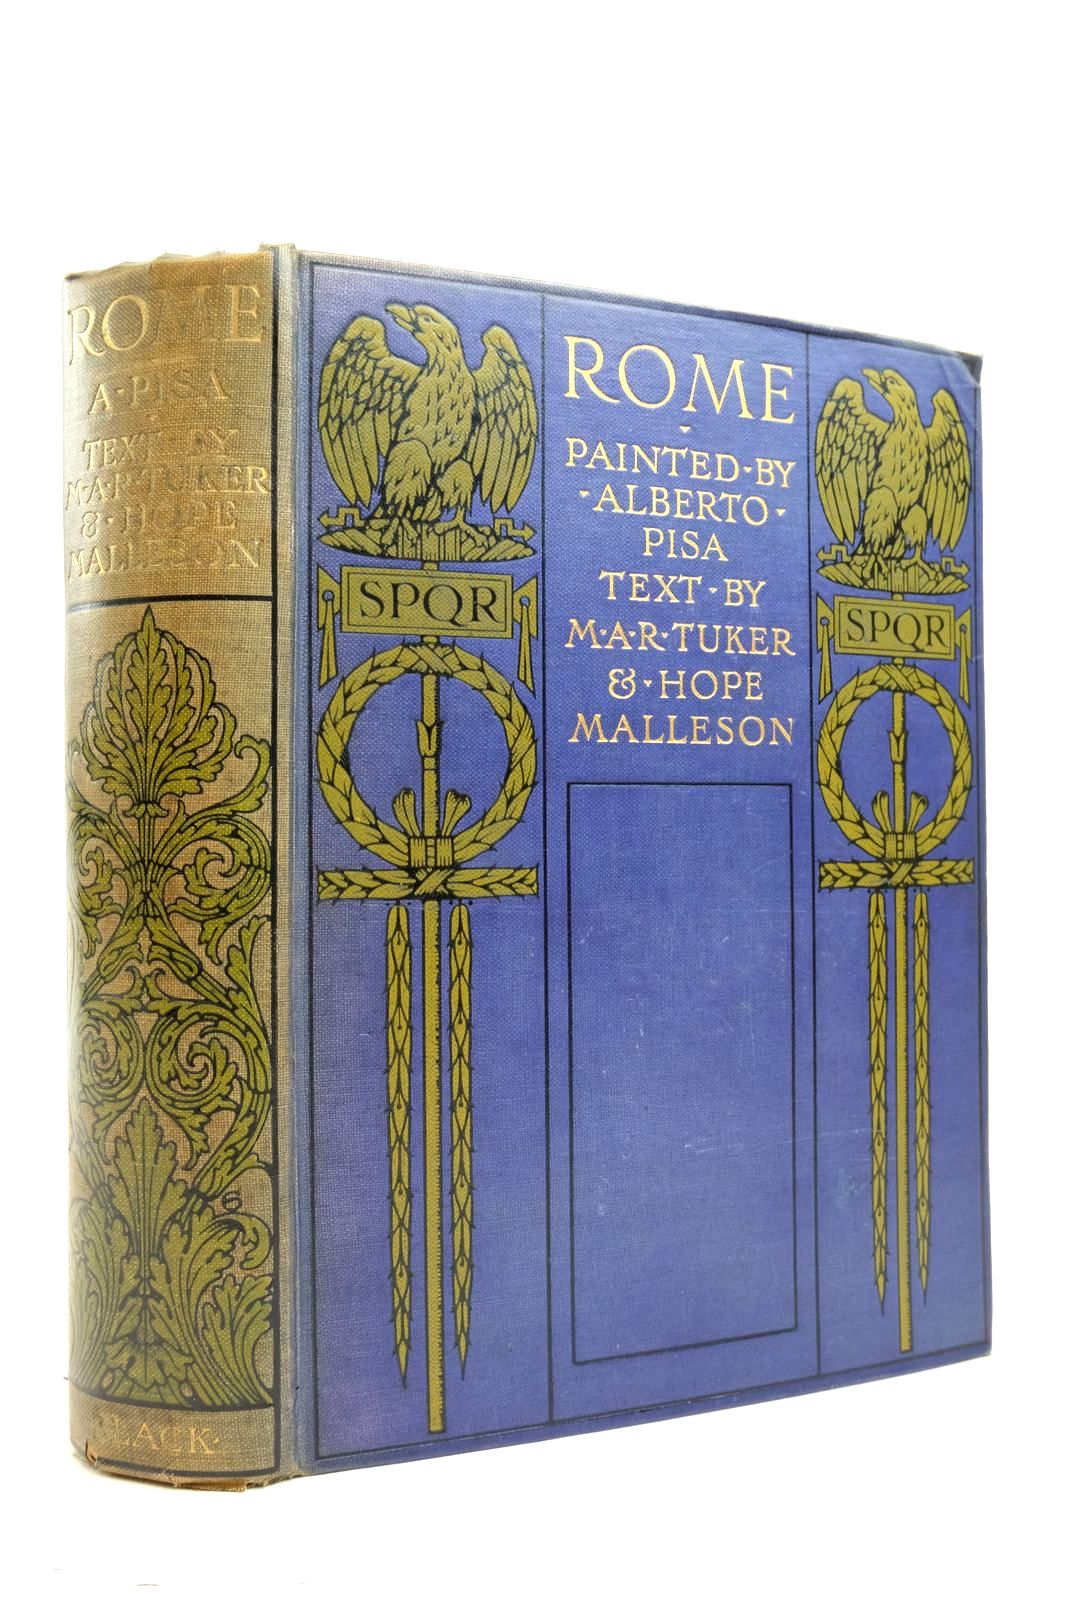 Photo of ROME written by Tuker, M.A.R.
Malleson, Hope illustrated by Pisa, Alberto published by Adam & Charles Black (STOCK CODE: 2137081)  for sale by Stella & Rose's Books